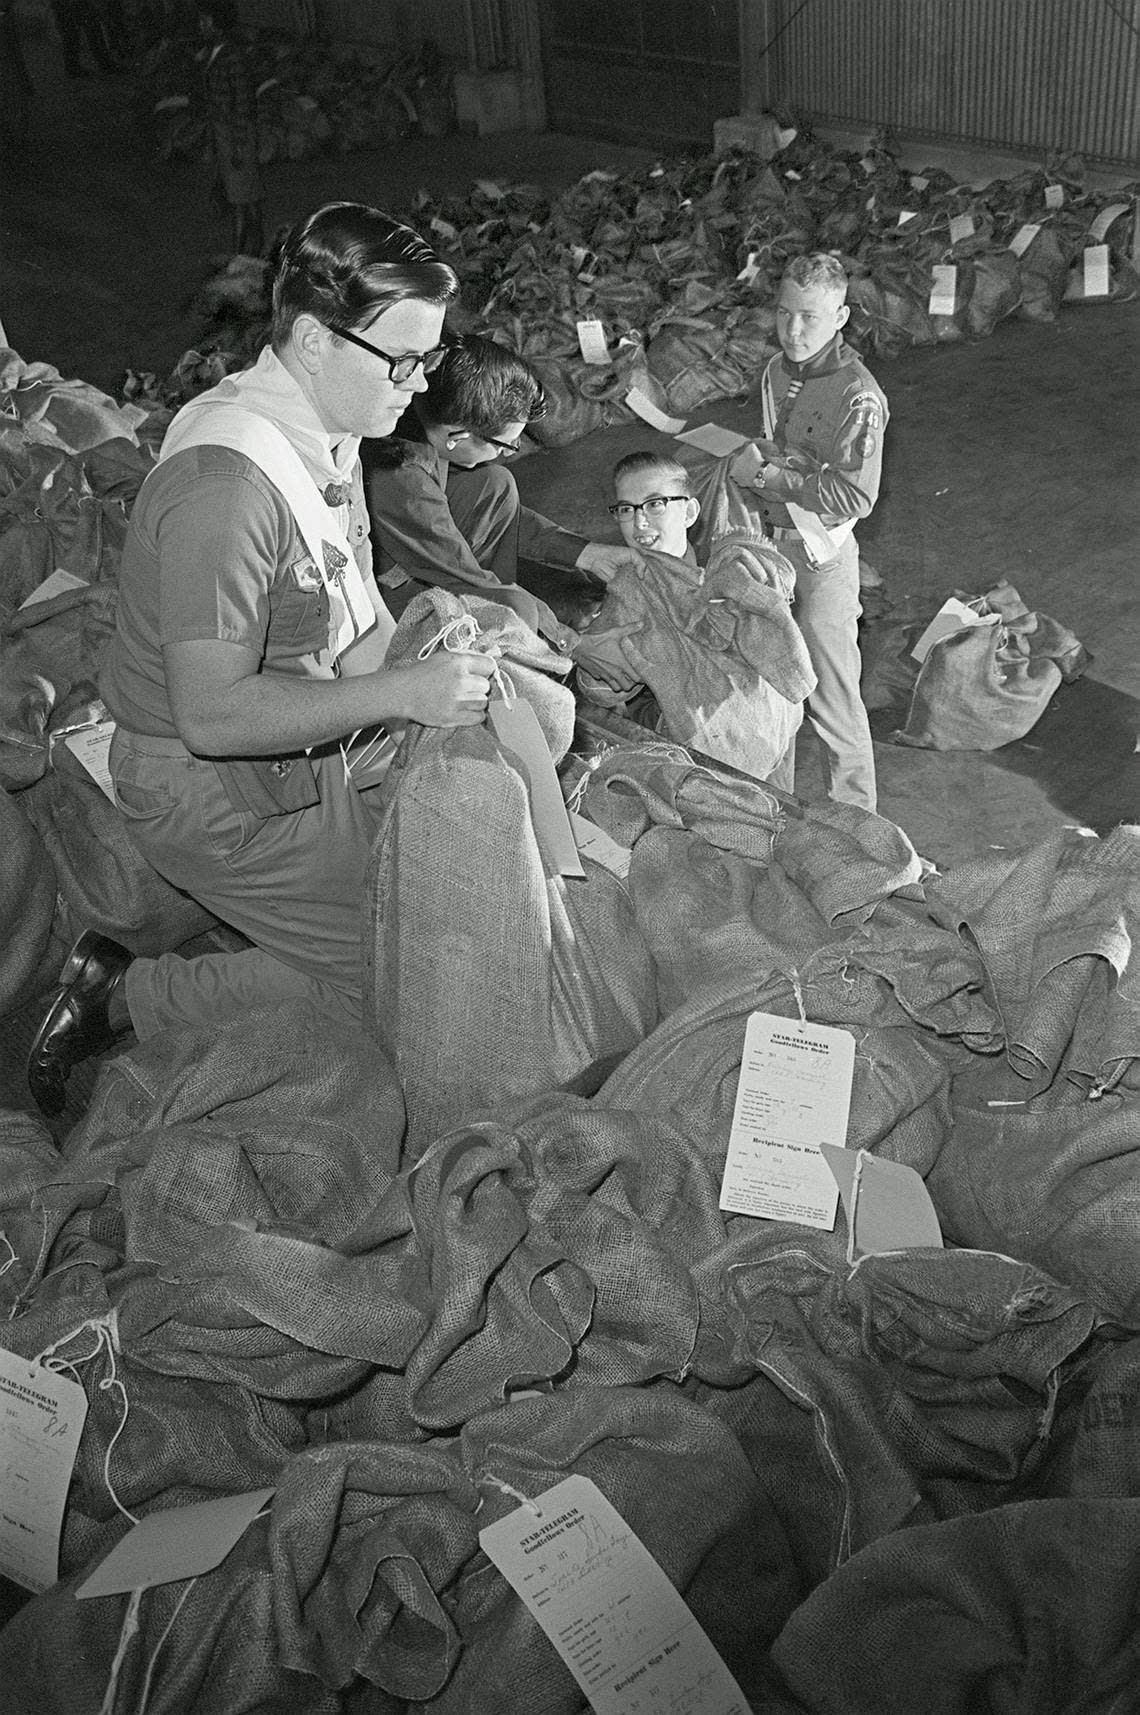 Dec. 24, 1965: Boy Scouts turned Santa’s helpers in readying a sea of sacks that Goodfellows filled for needy children. Among the helpers were Scouts Billy Carver, Explorer Larry Hyink, Explorer Billy Wilson and Scout Tommy Teter, left to right. Fort Worth Star-Telegram/UT Arlington Special Collections